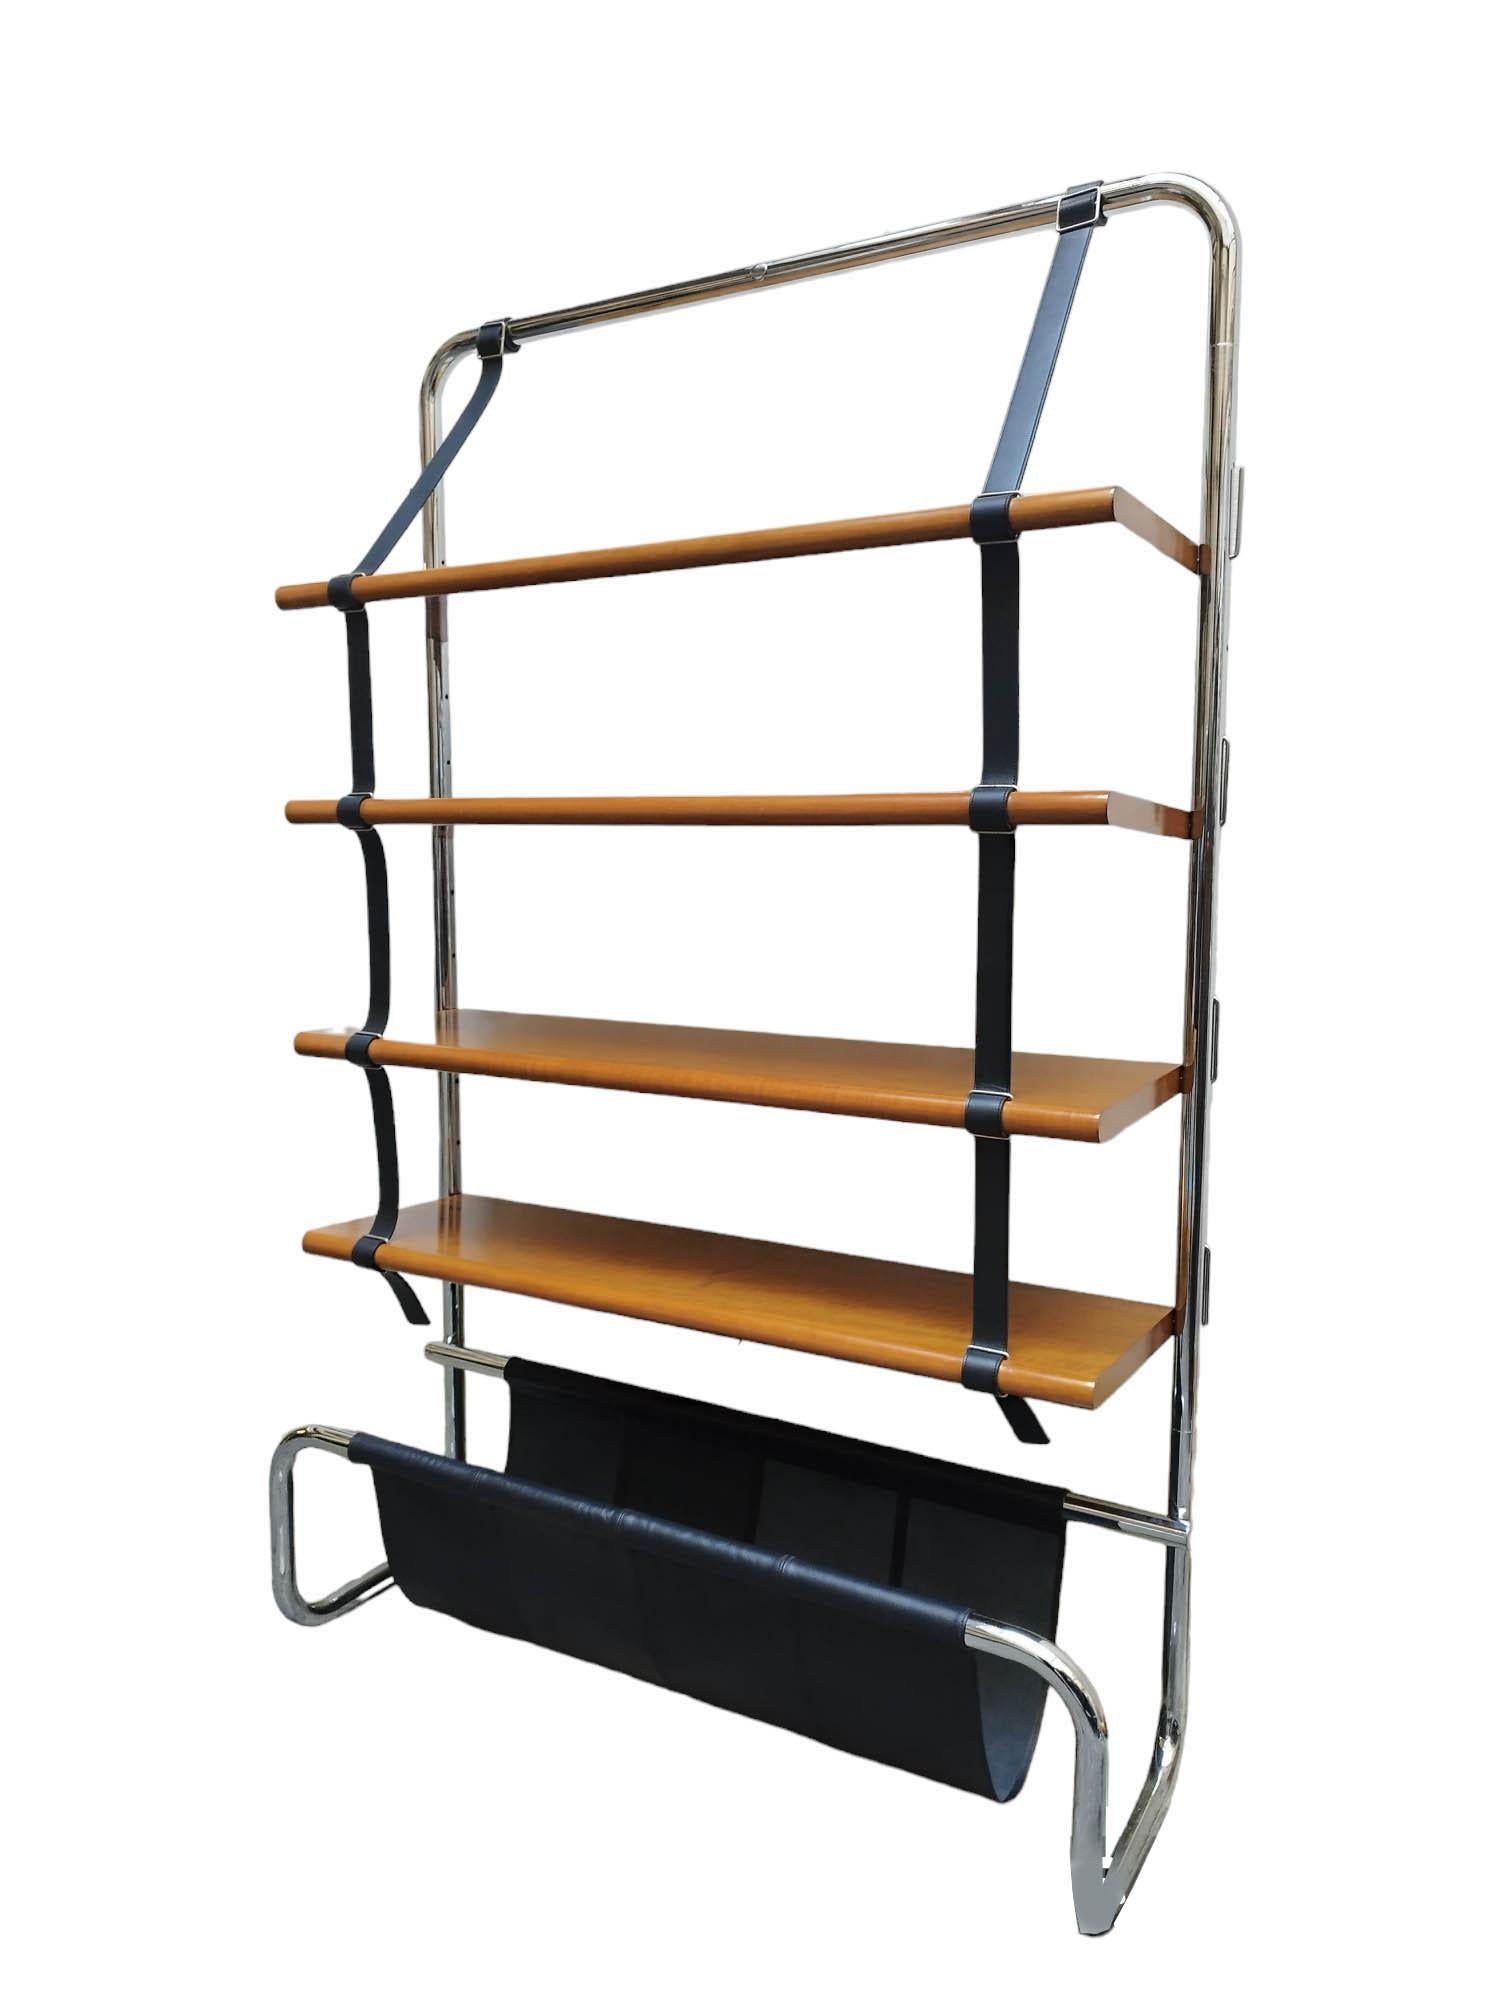 Beautiful Jumbo wall unit designed by Luigi Massoni for Poltrona Frau, Italy 1971. Chromed tubular steel frame with wood shelves suspended by black leather straps. At the base there is a black saddle leather pouch - perfect for holding magazines.